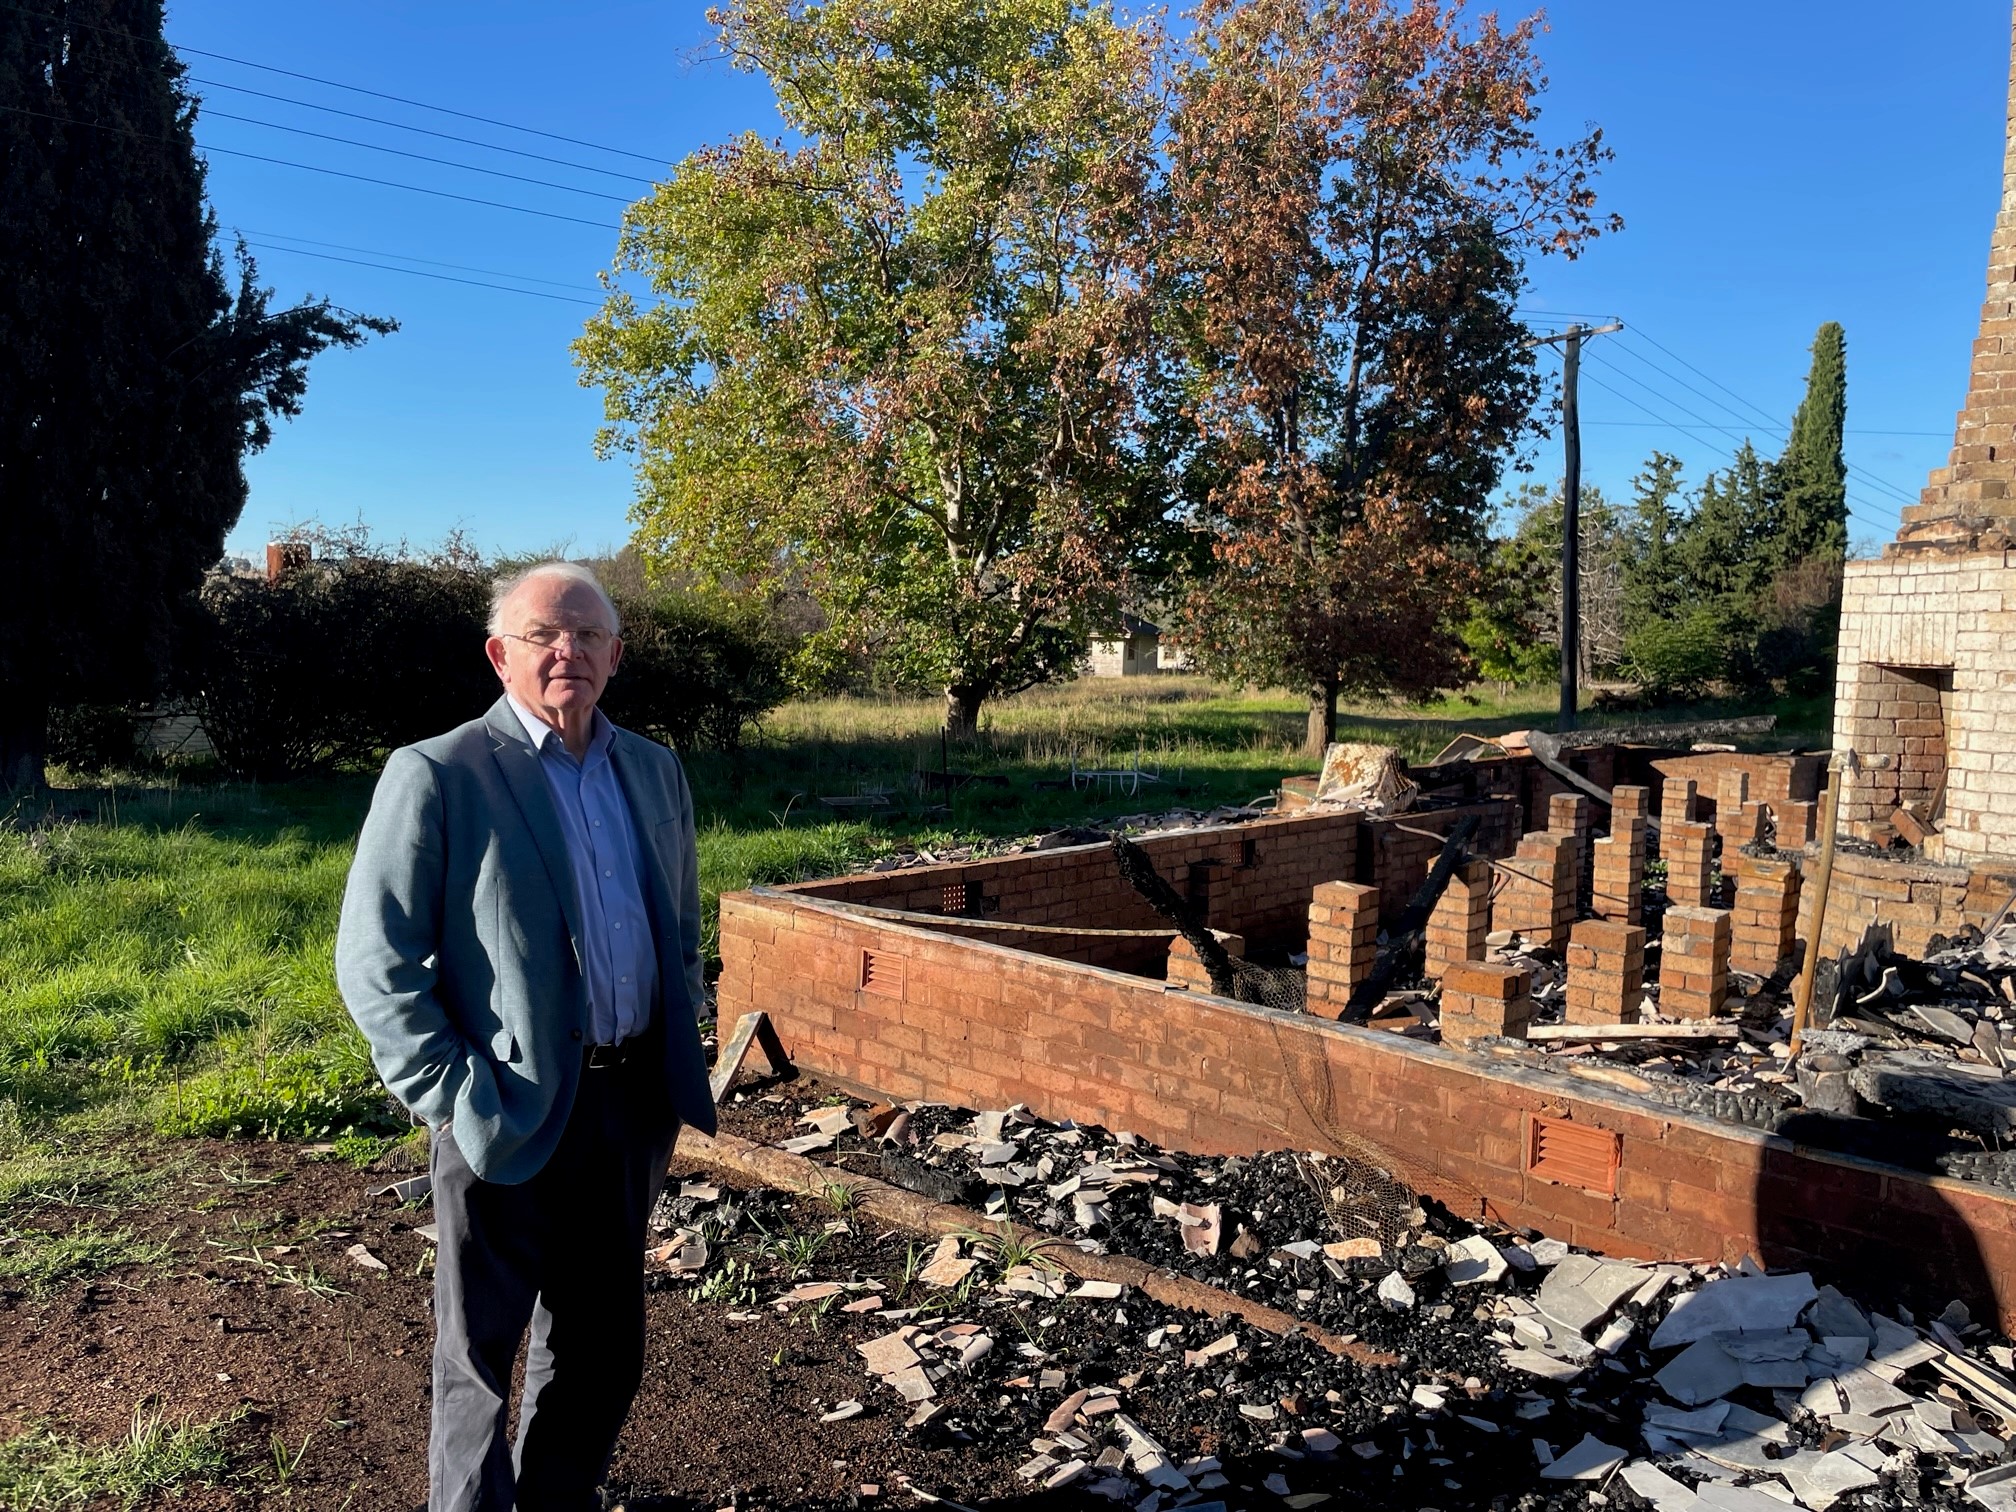 David Hill next to the burnt out remains of 'Molong Cottage' at Fairbridge Farm Molong, New South Wales, on April 20, 2022